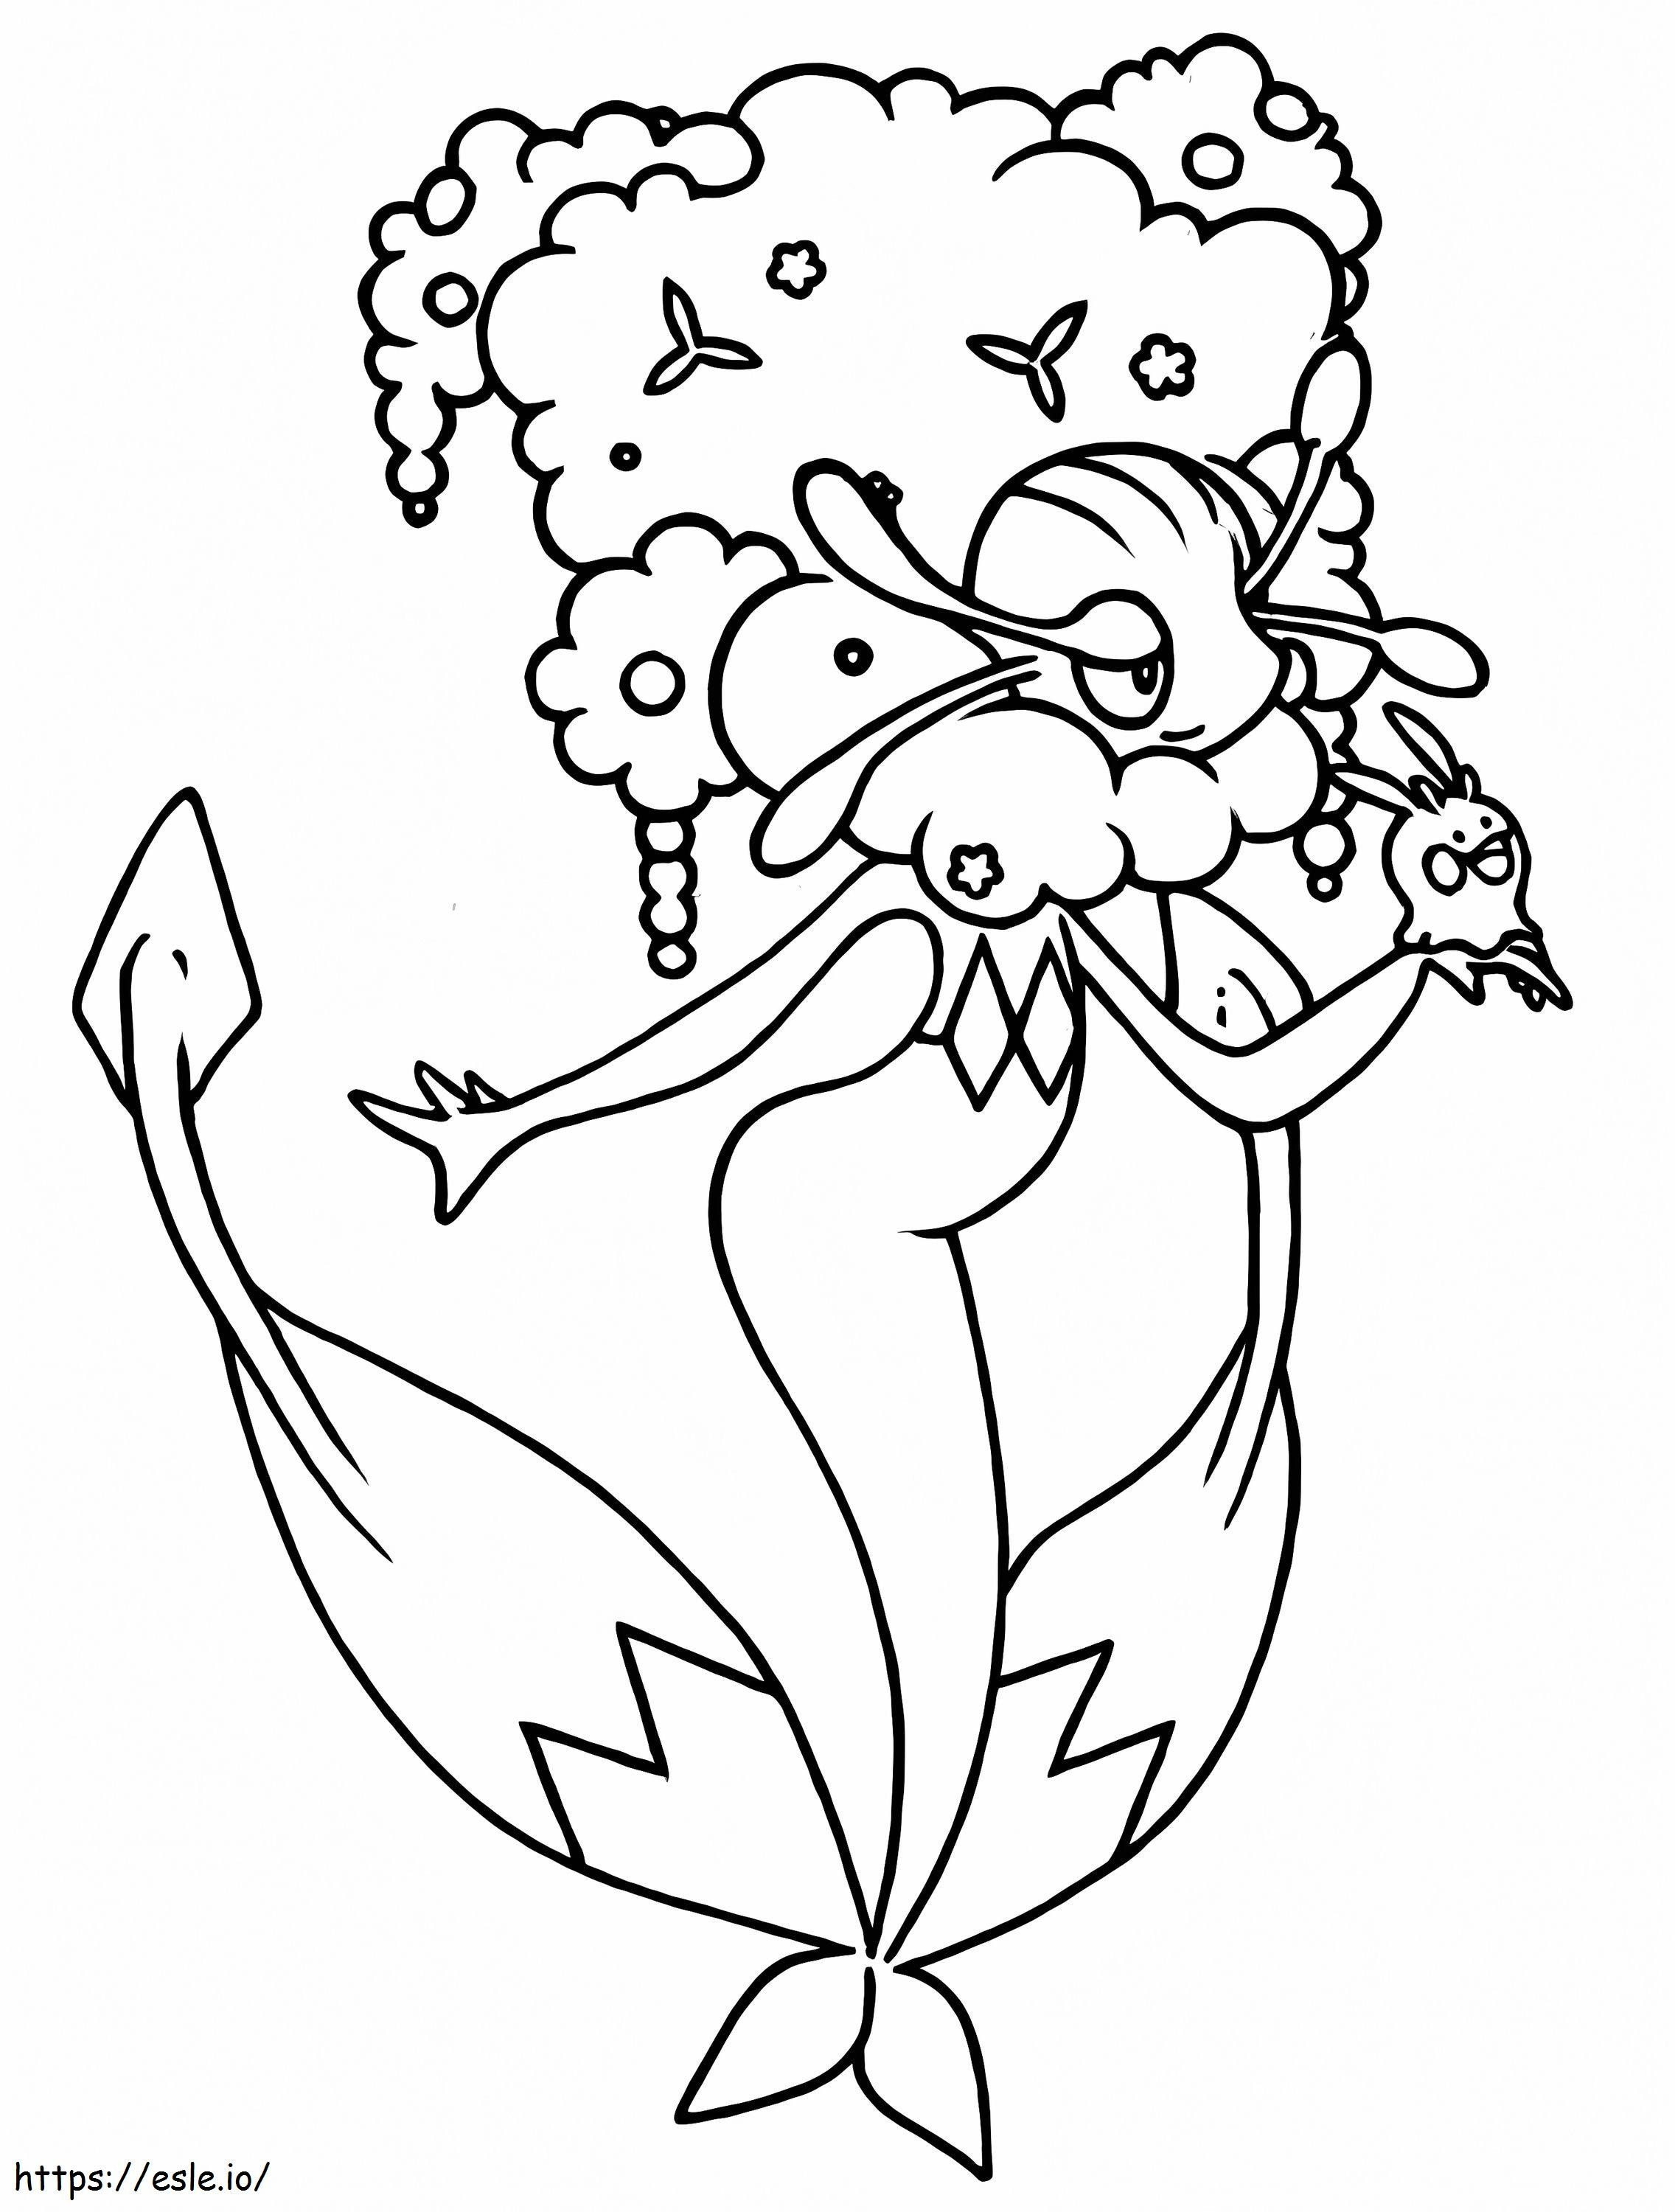 Printable Florges coloring page